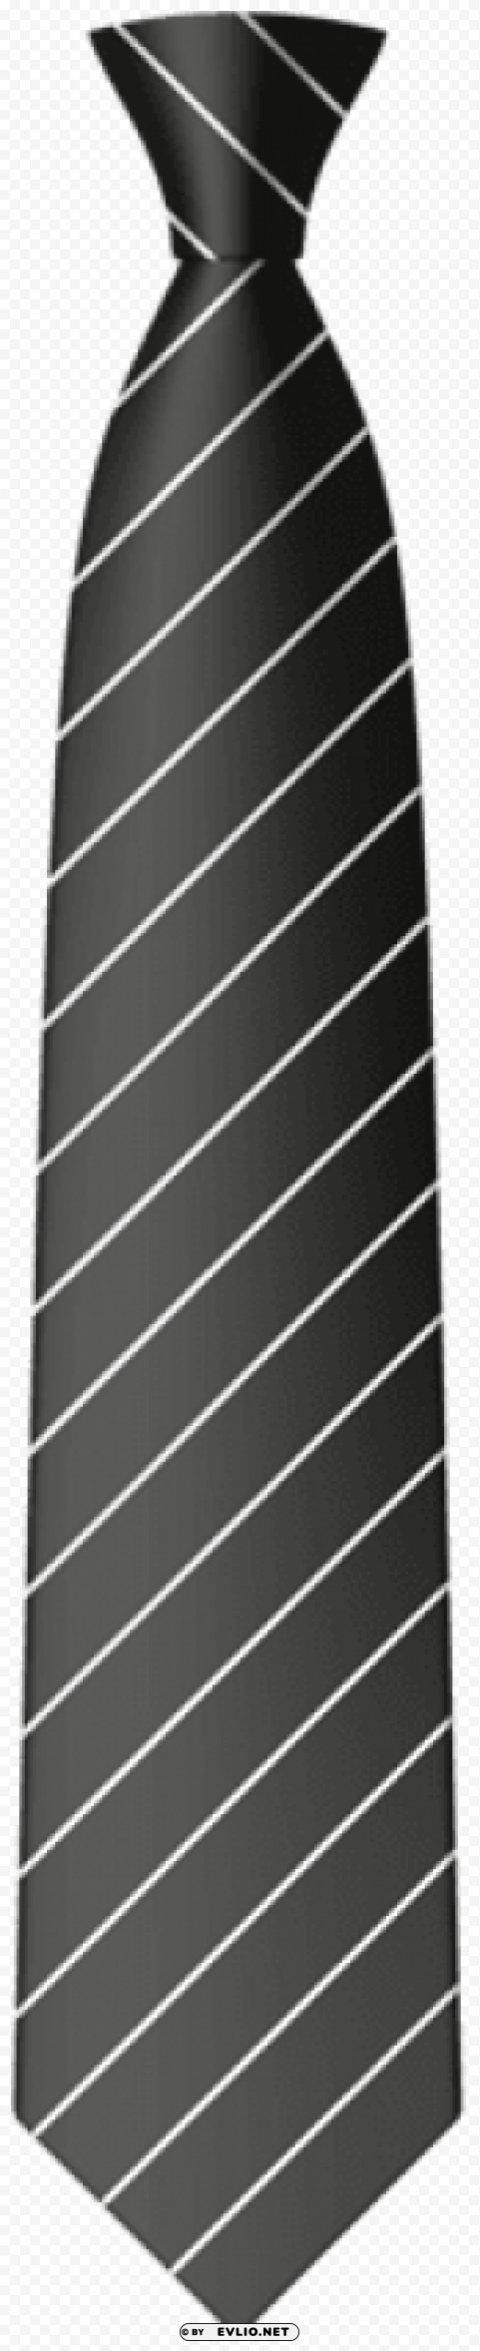 black tie PNG Image Isolated with Transparent Clarity